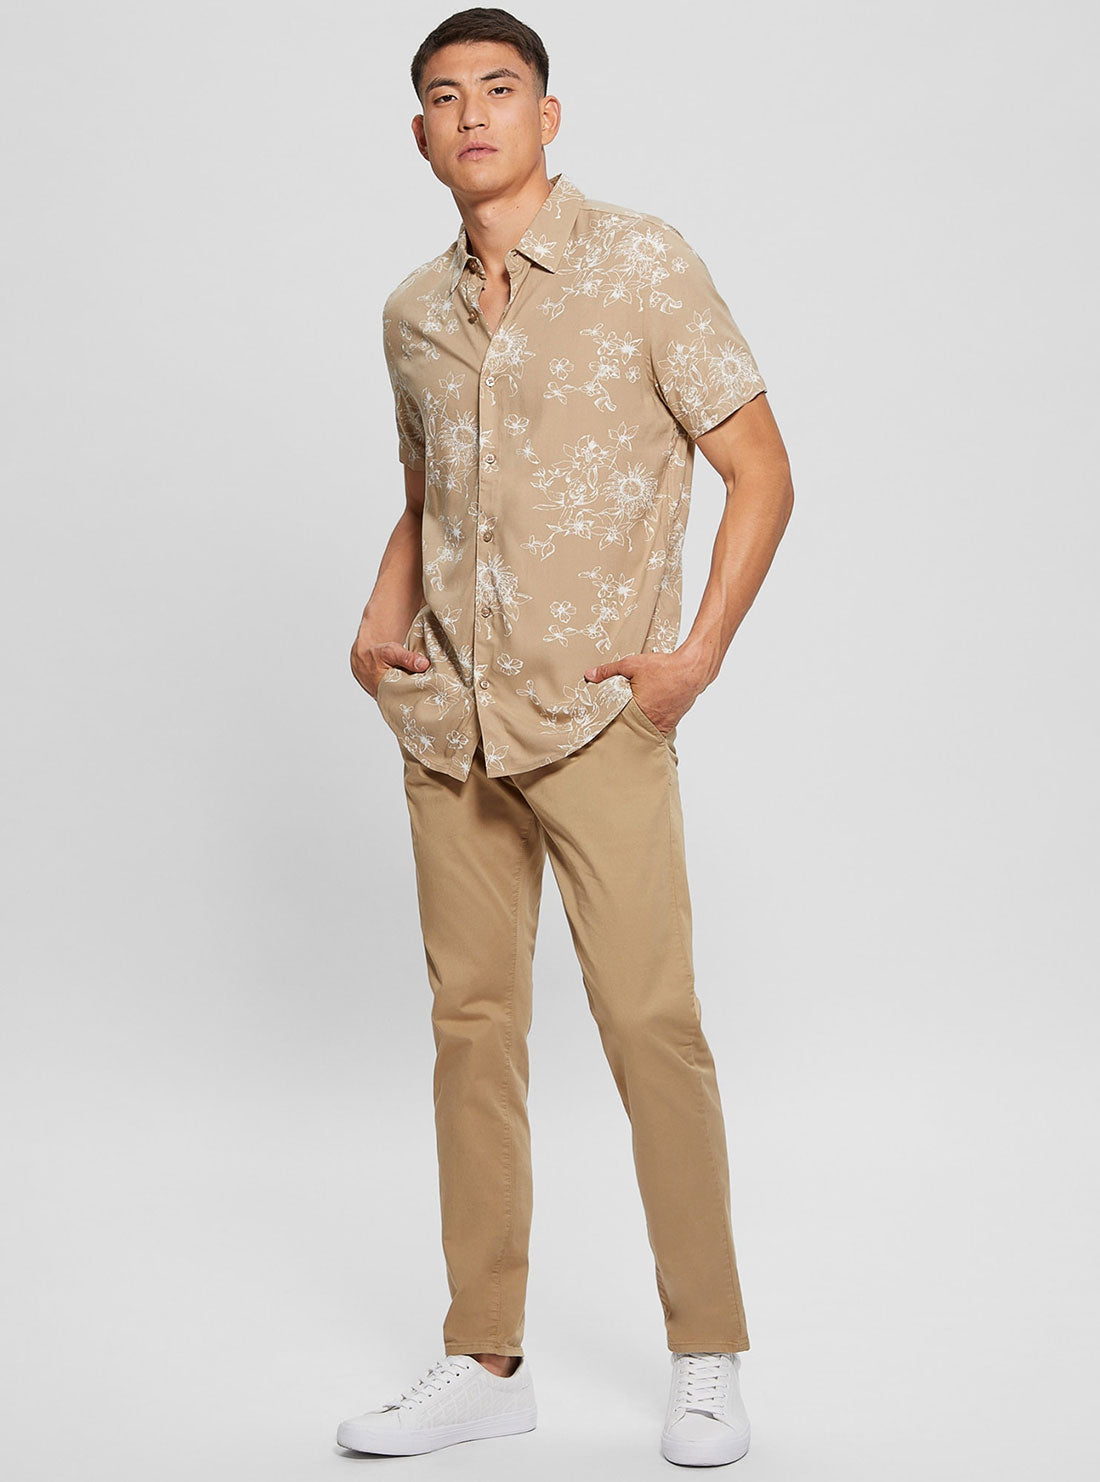 Eco Rayon Sienna Floral Shirt | GUESS Men's | Full view